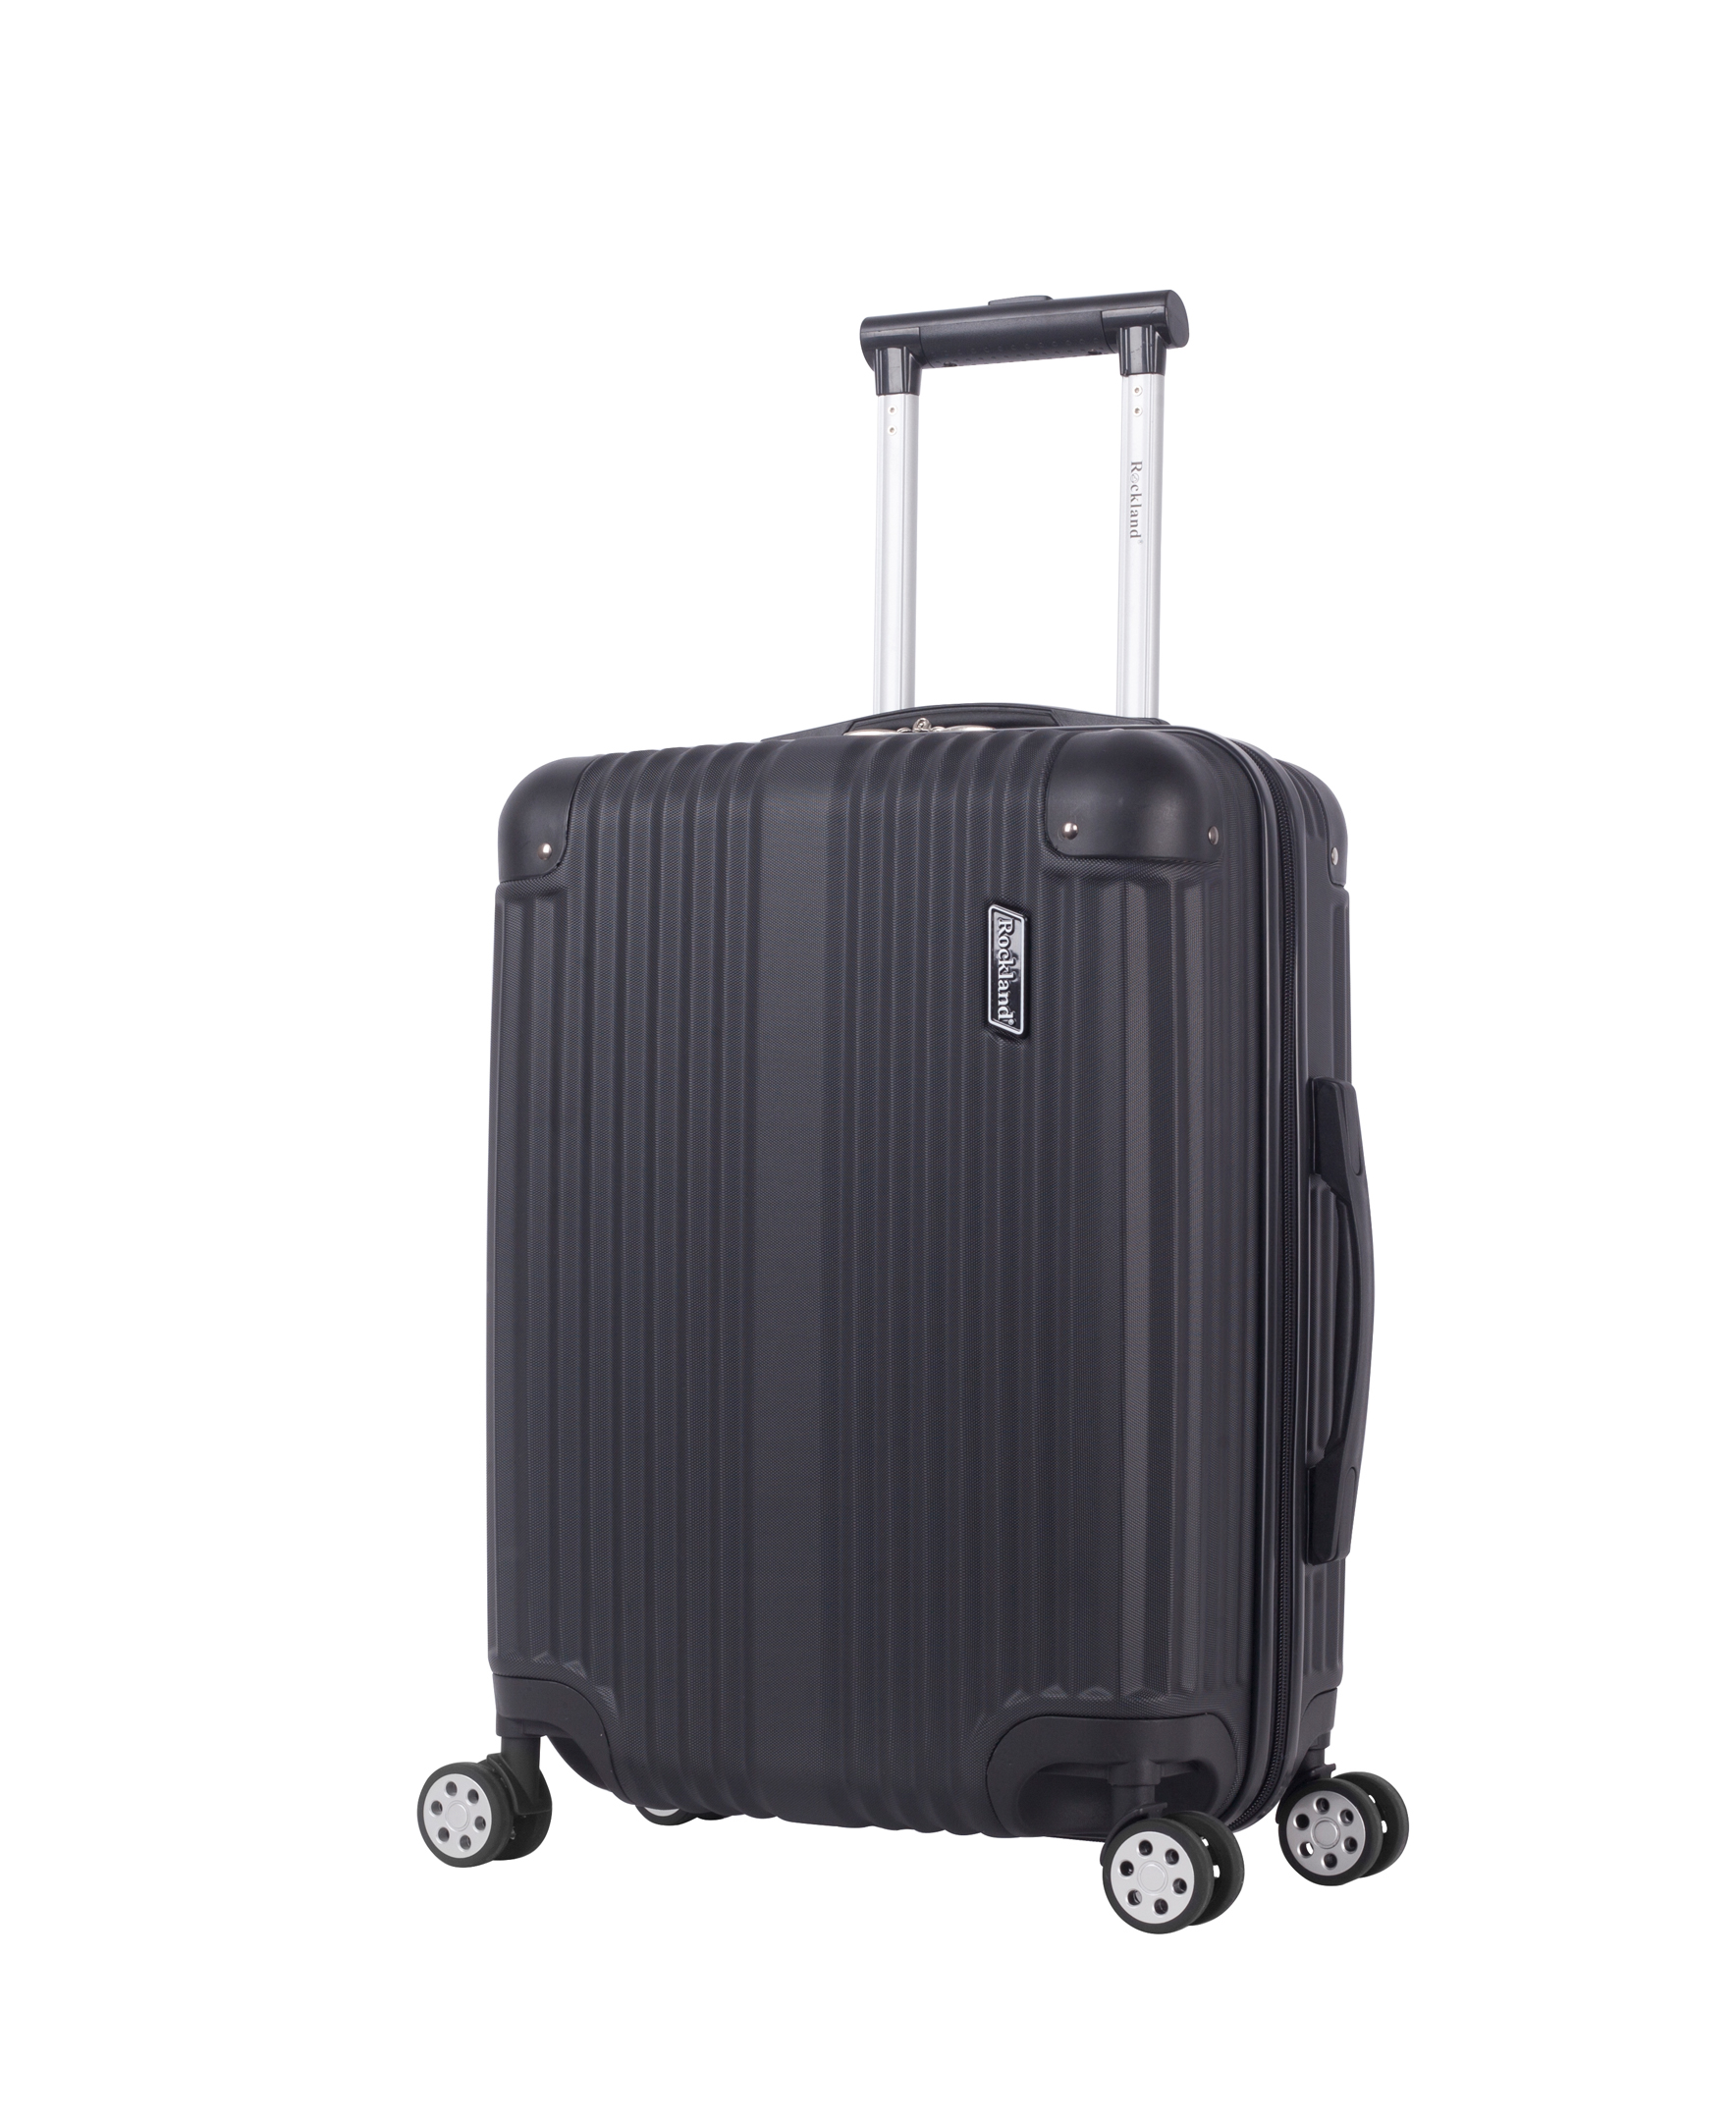 Rockland Luggage Berlin 3 Piece ABS Non-Expandable Luggage Set, Black - image 6 of 9